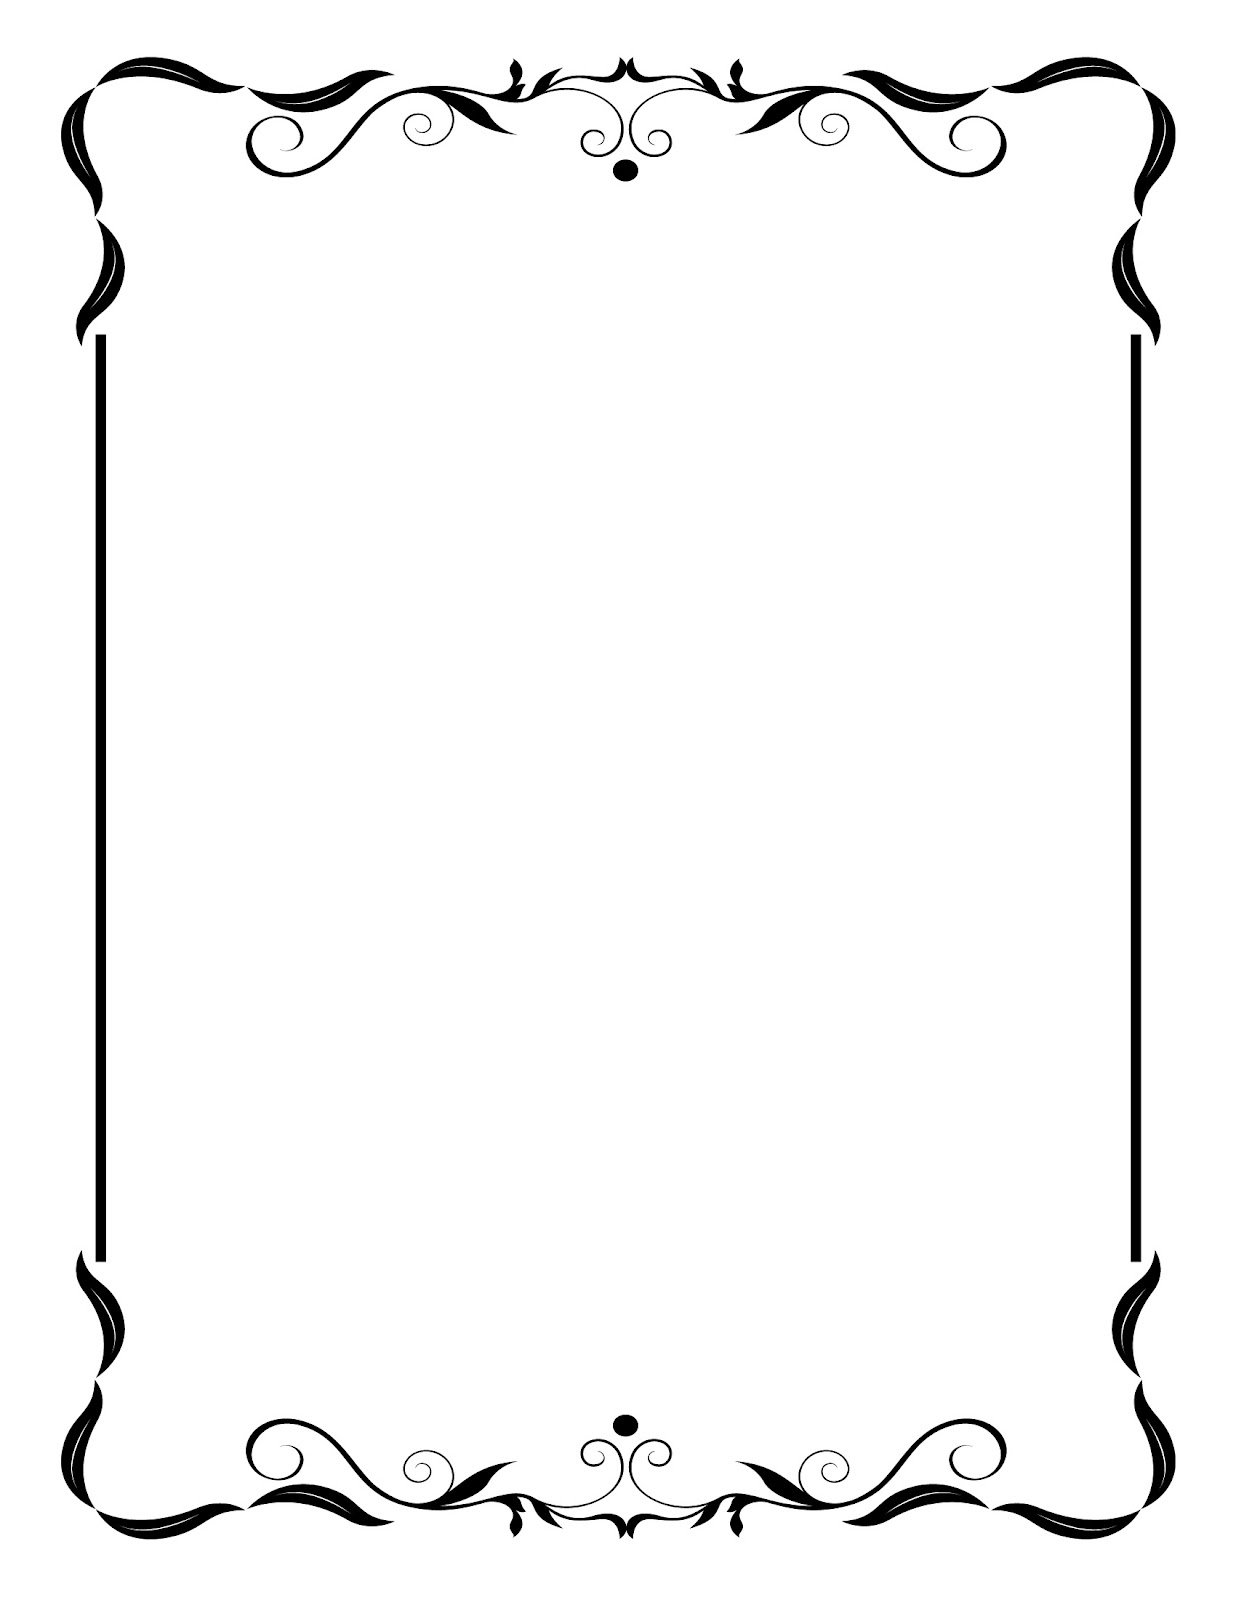 Free wedding clip art frame - Free Clipart Images